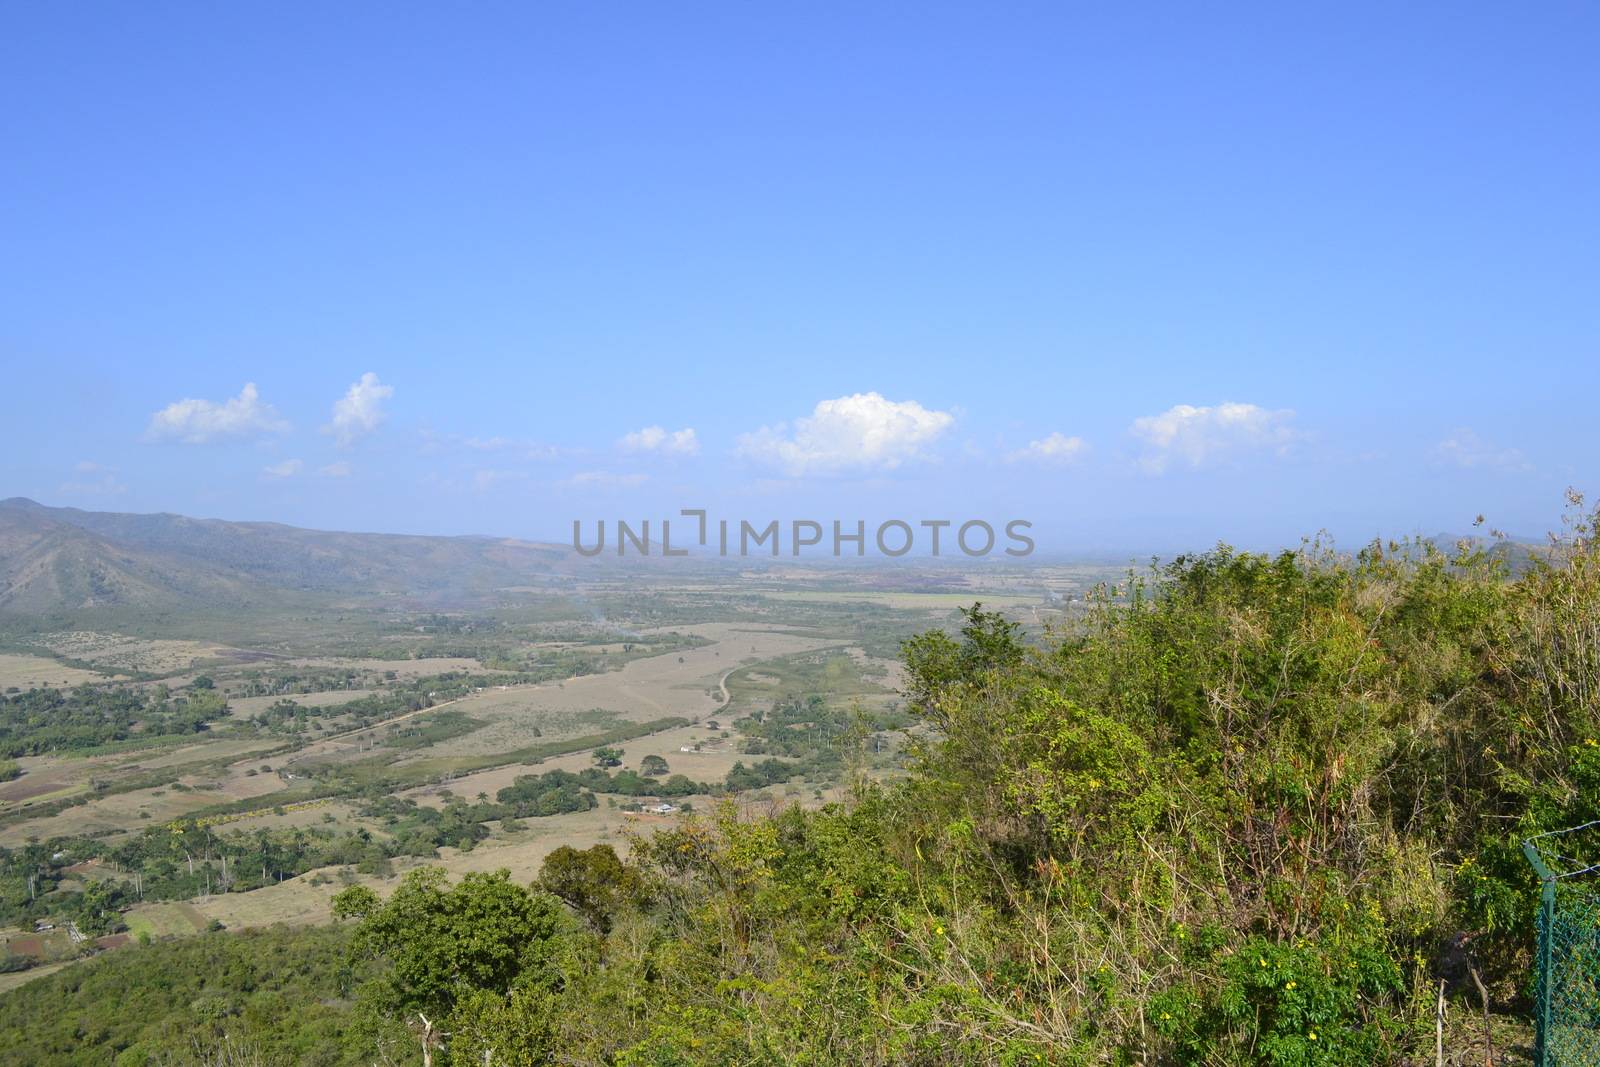 Landscape and scenery of the surroundings of Trinidad, Cuba, as seen from viewpoint Cerro de la Vigia during sunset by kb79